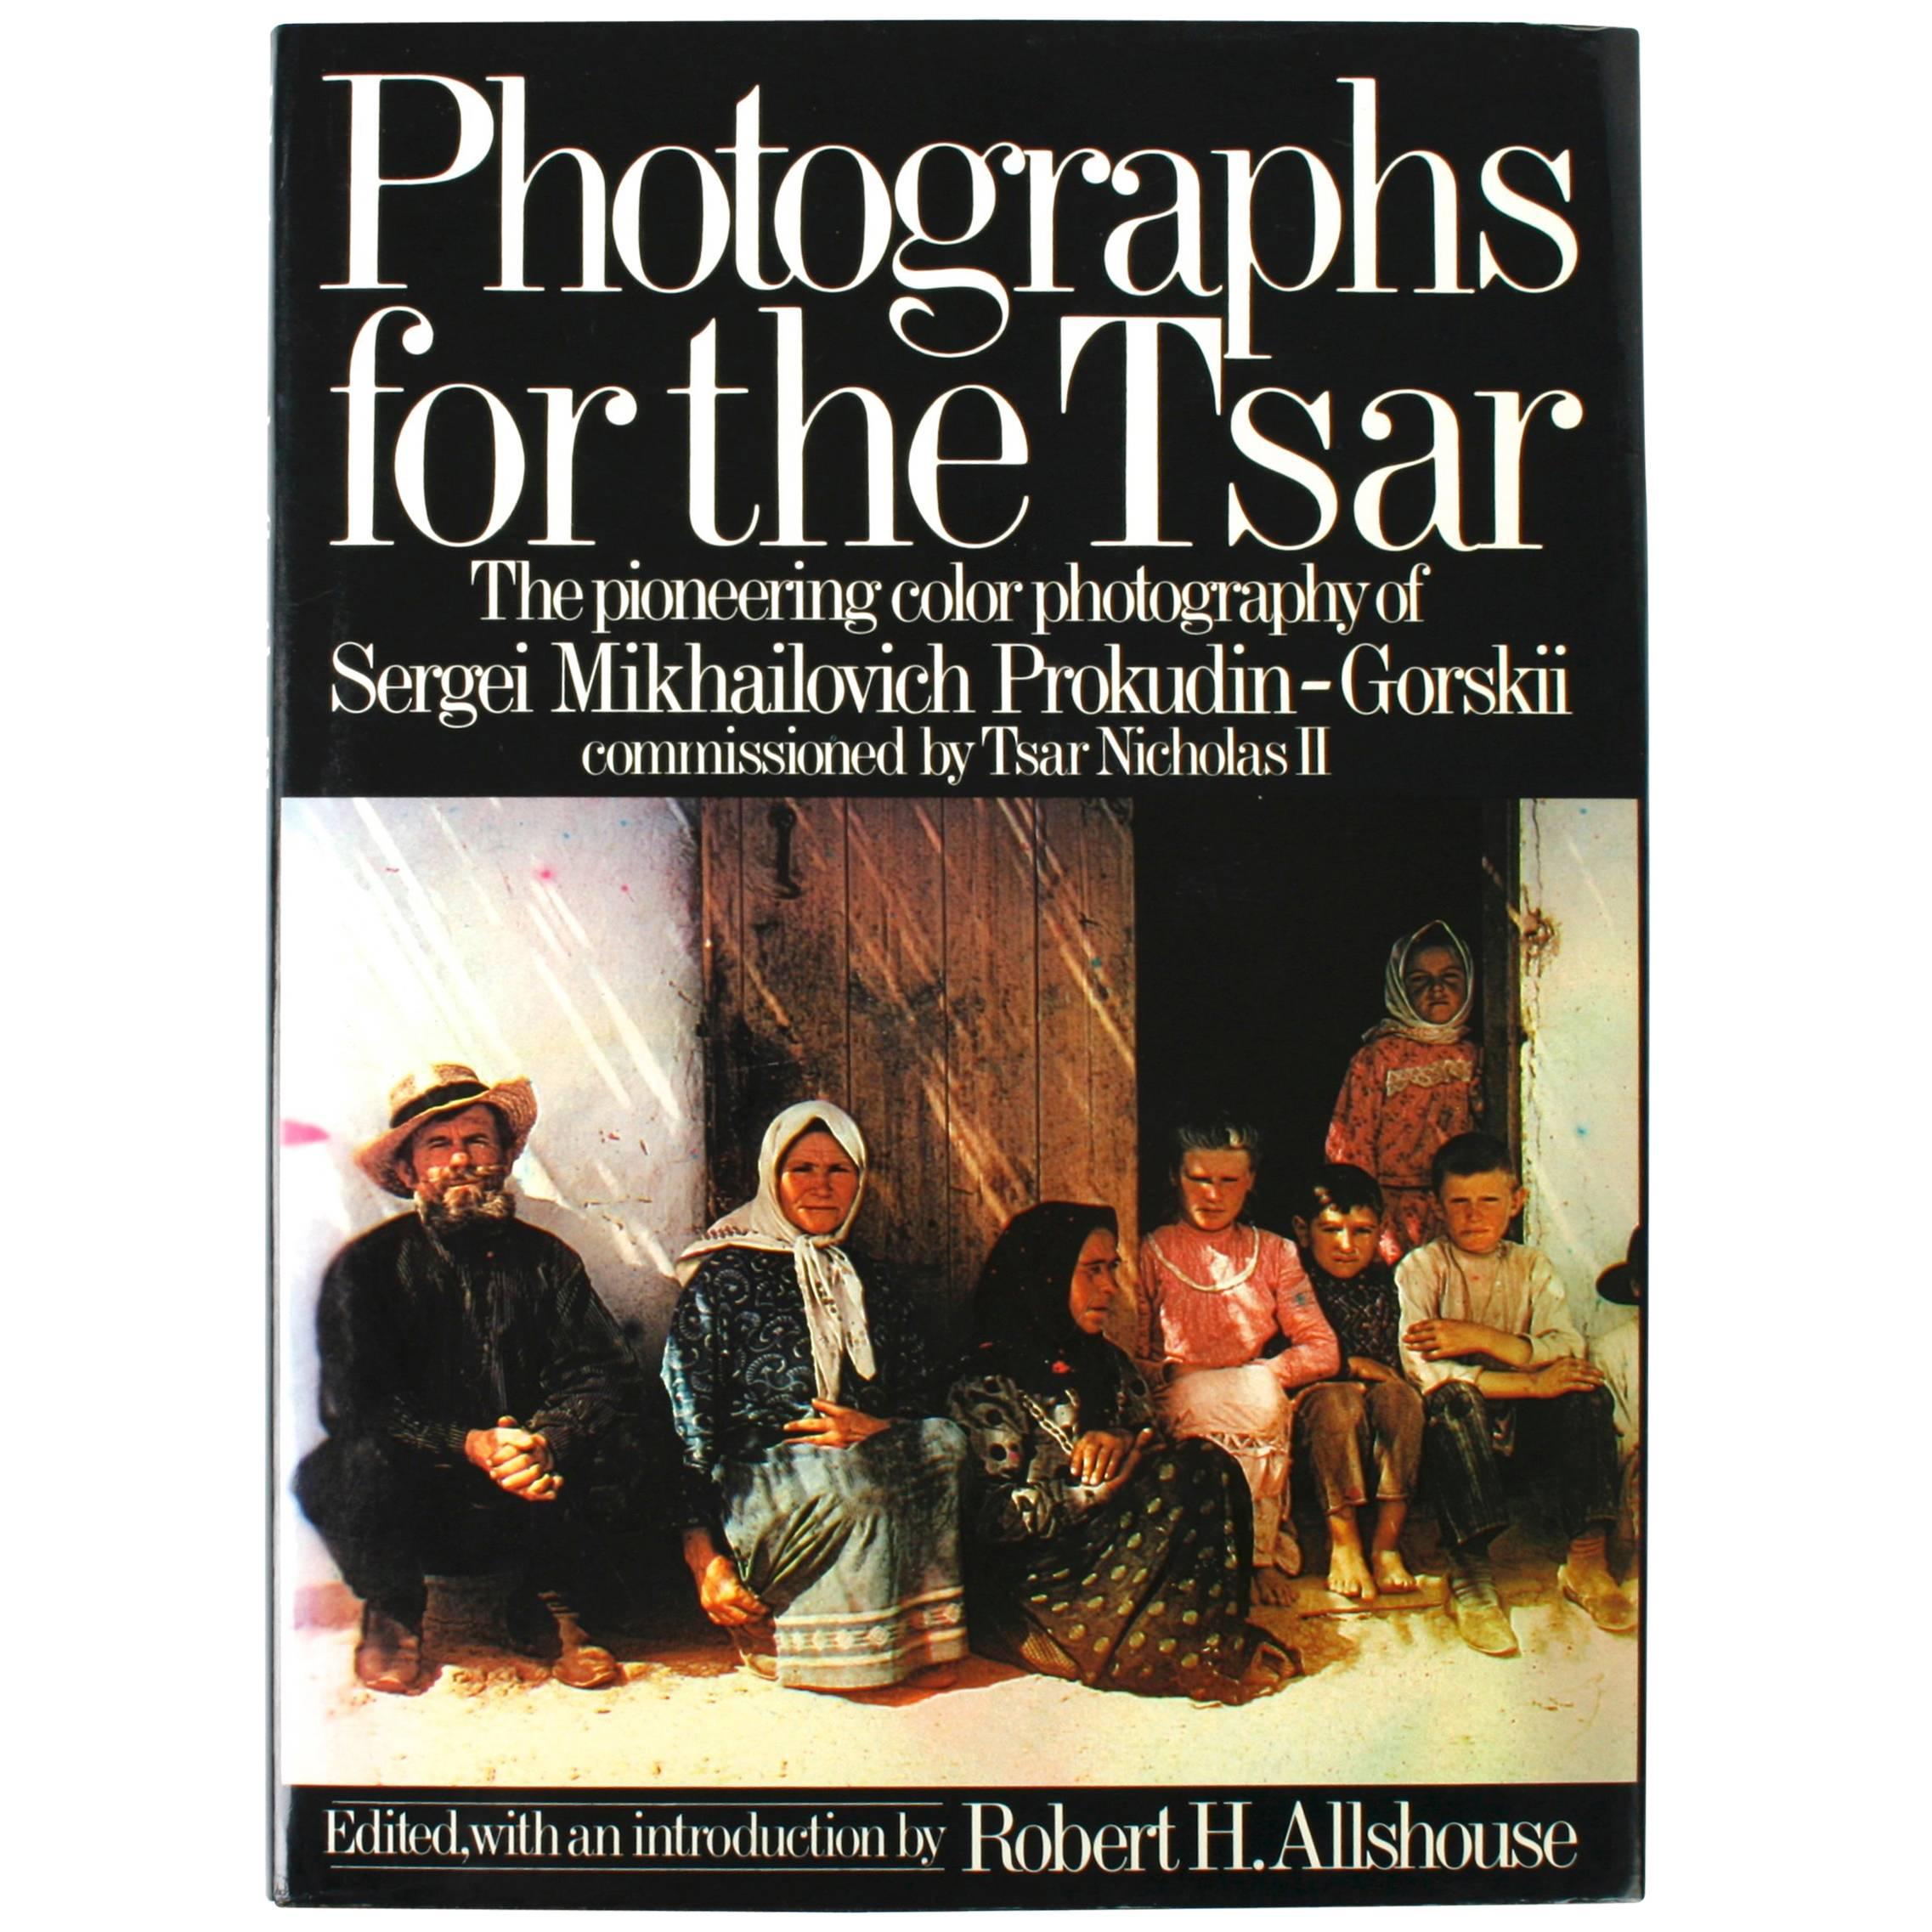 "Photographs for the Tsar" Book, First Edition